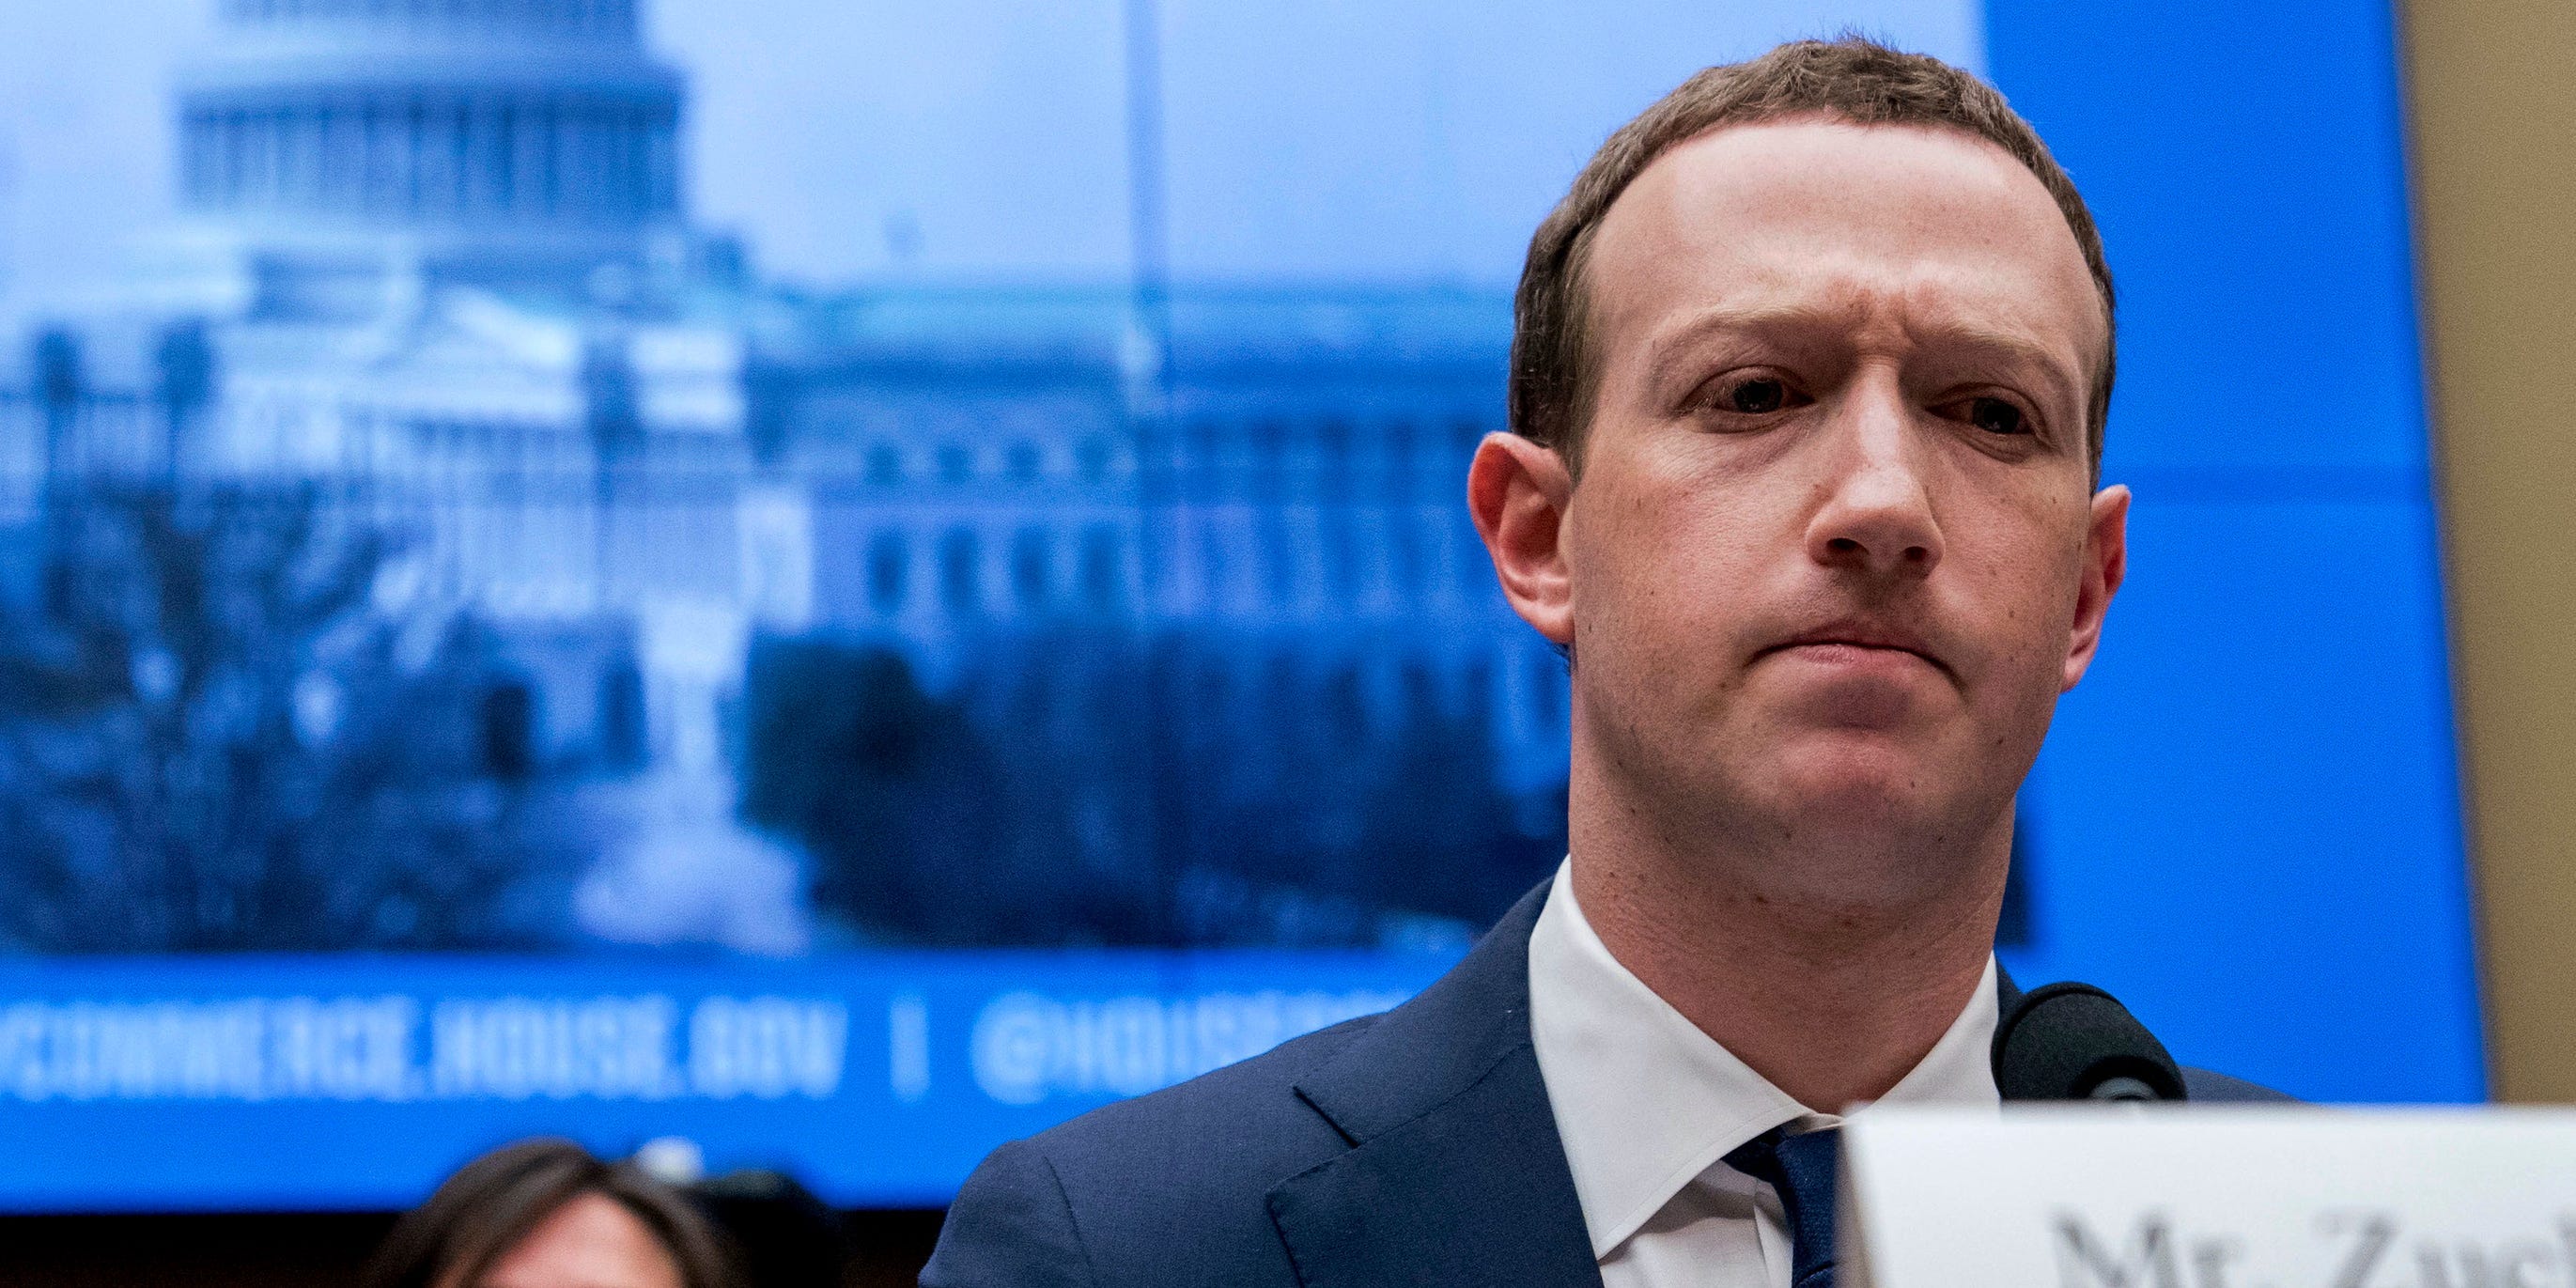 Mark Zuckerberg, Bill Gates, Elon Musk, and 6 of the other wealthiest US billionaires reportedly lost a combined $14 billion in a single day